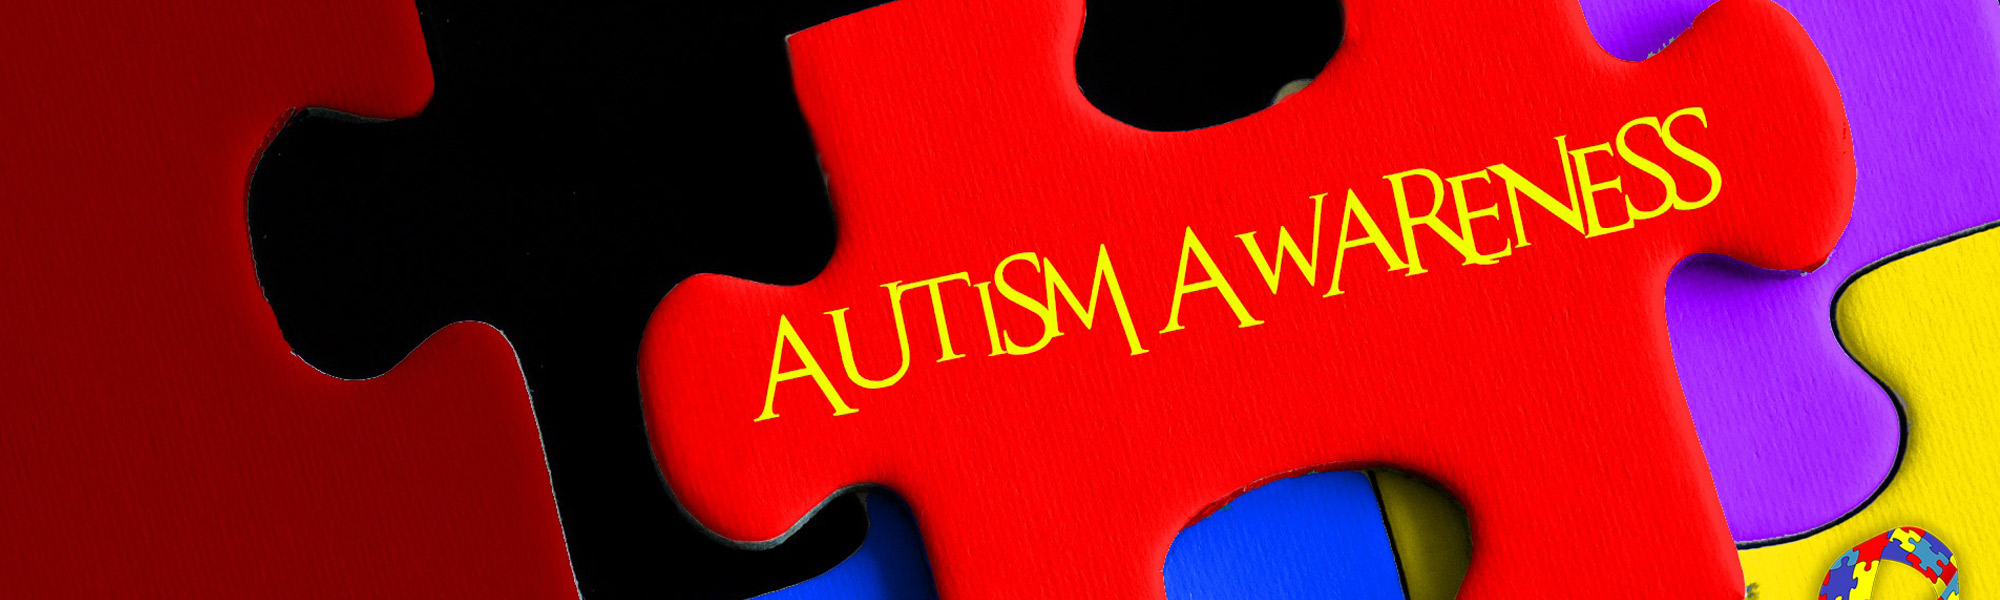 Autism Pathway in Bolton